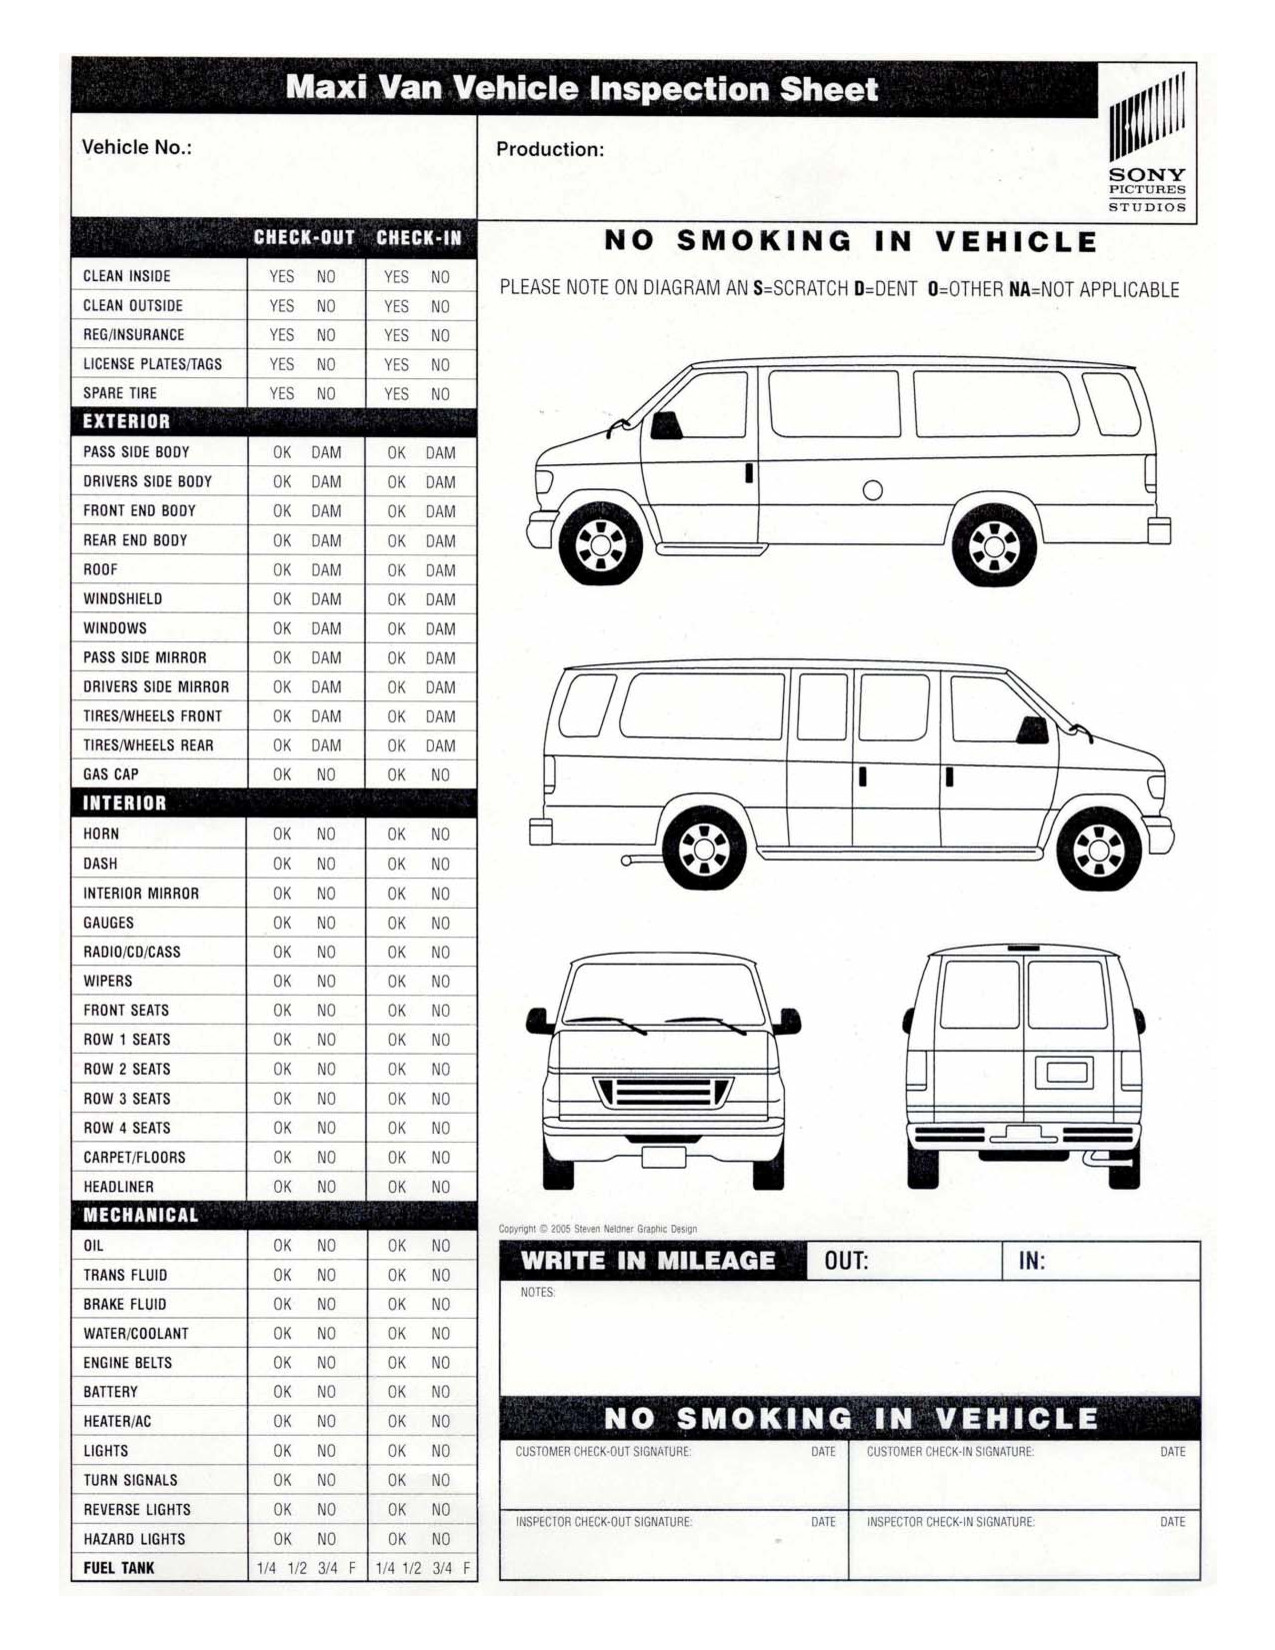 Vehicle Inspection Sheet Template